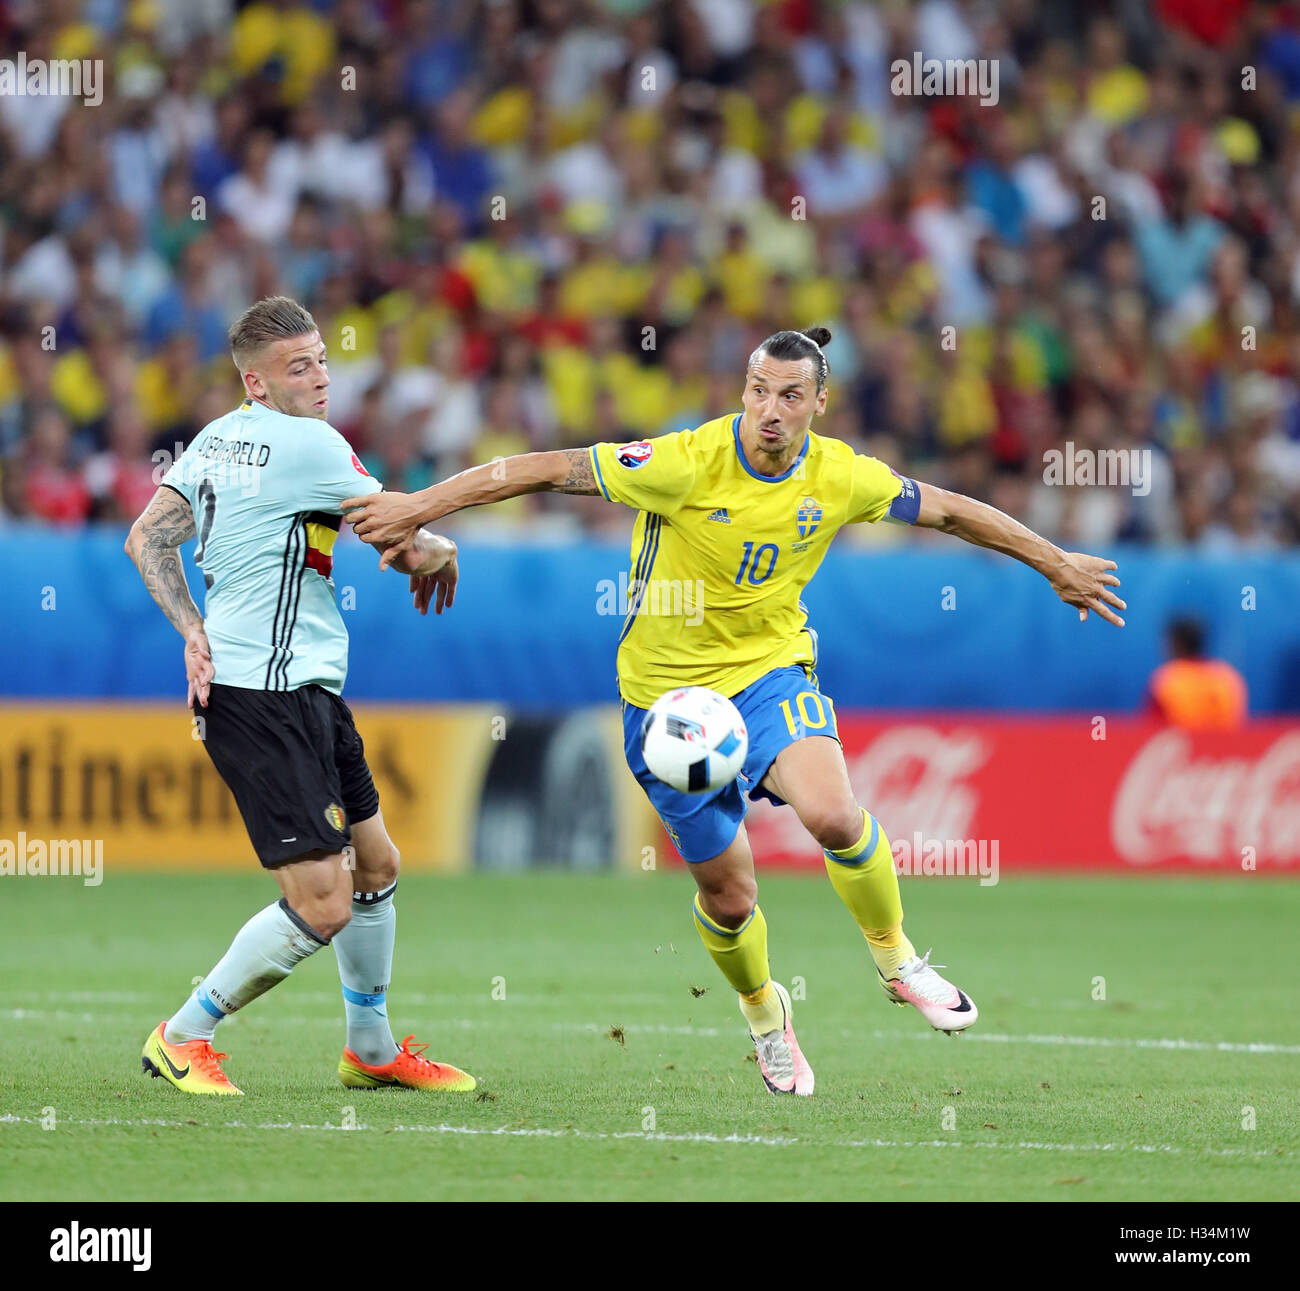 NICE, FRANCE - JUNE 22, 2016: Zlatan Ibrahimovic of Sweden (R) fights for a ball with Toby Alderweireld of Belgium during their UEFA EURO 2016 game at Allianz Riviera Stade de Nice, Nice, France Stock Photo